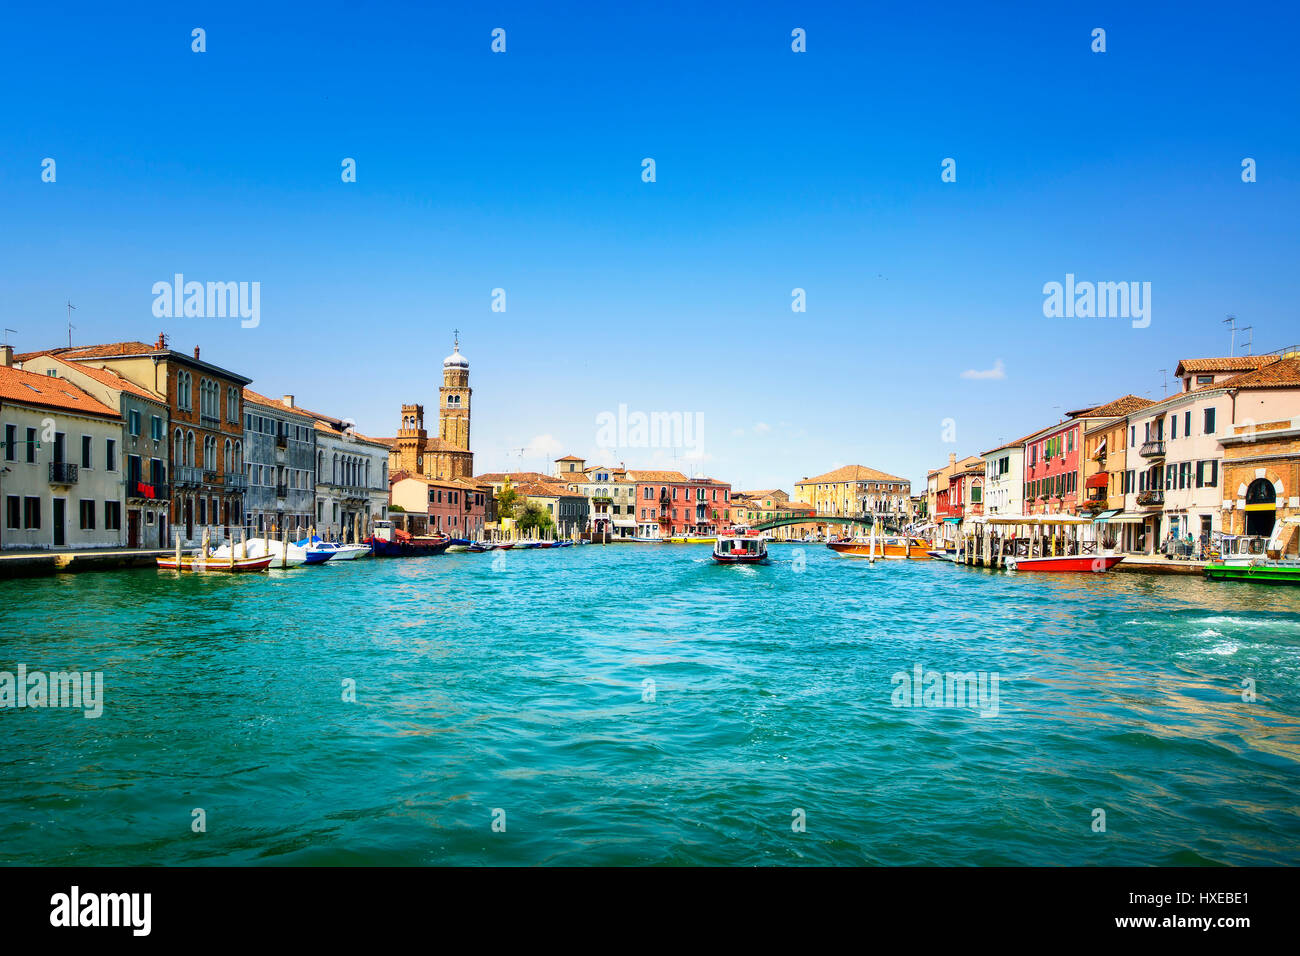 Murano glass making island, water canal, bridge, boat and traditional buildings. Venice or Venezia, Italy, Europe. Stock Photo